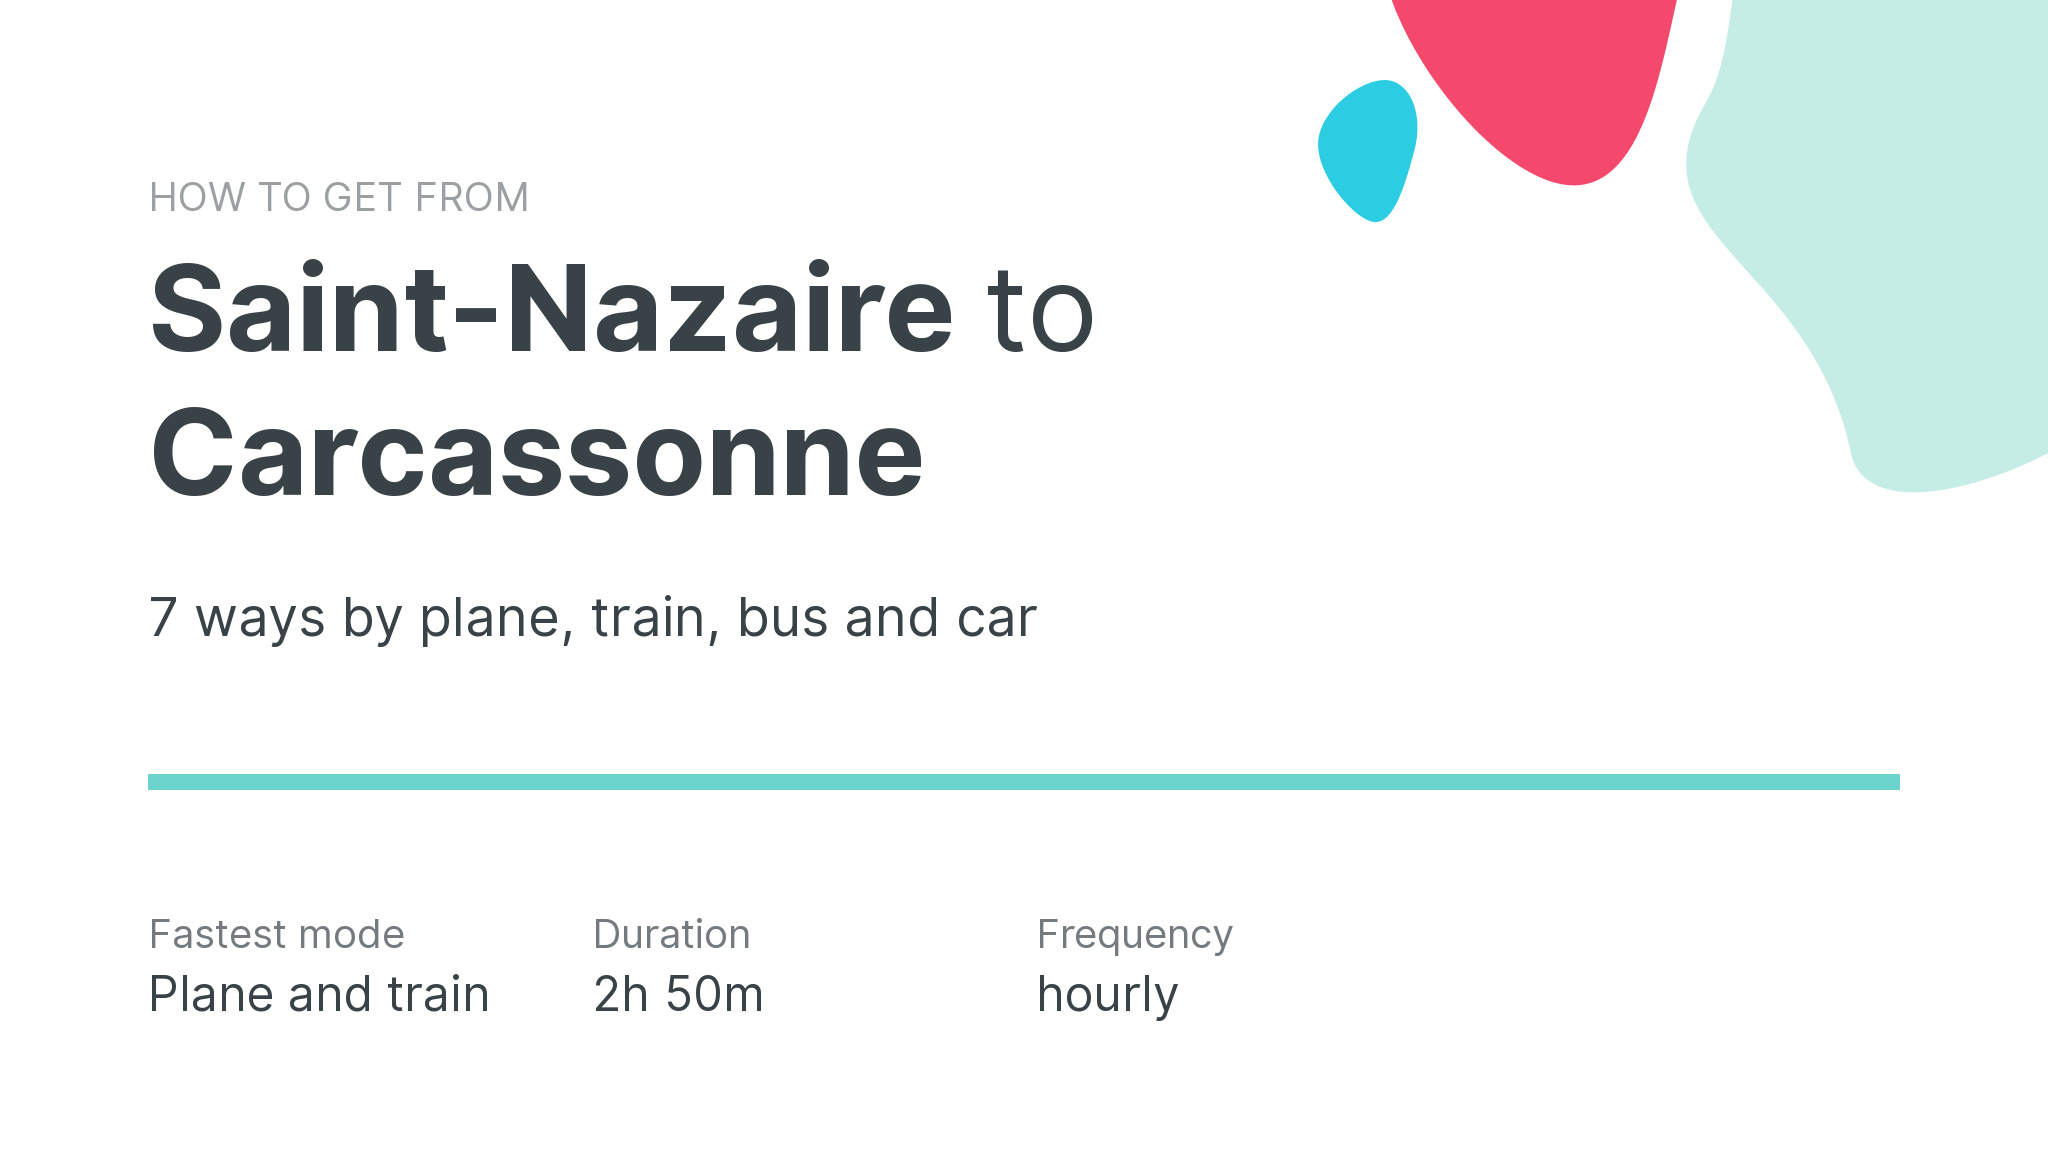 How do I get from Saint-Nazaire to Carcassonne